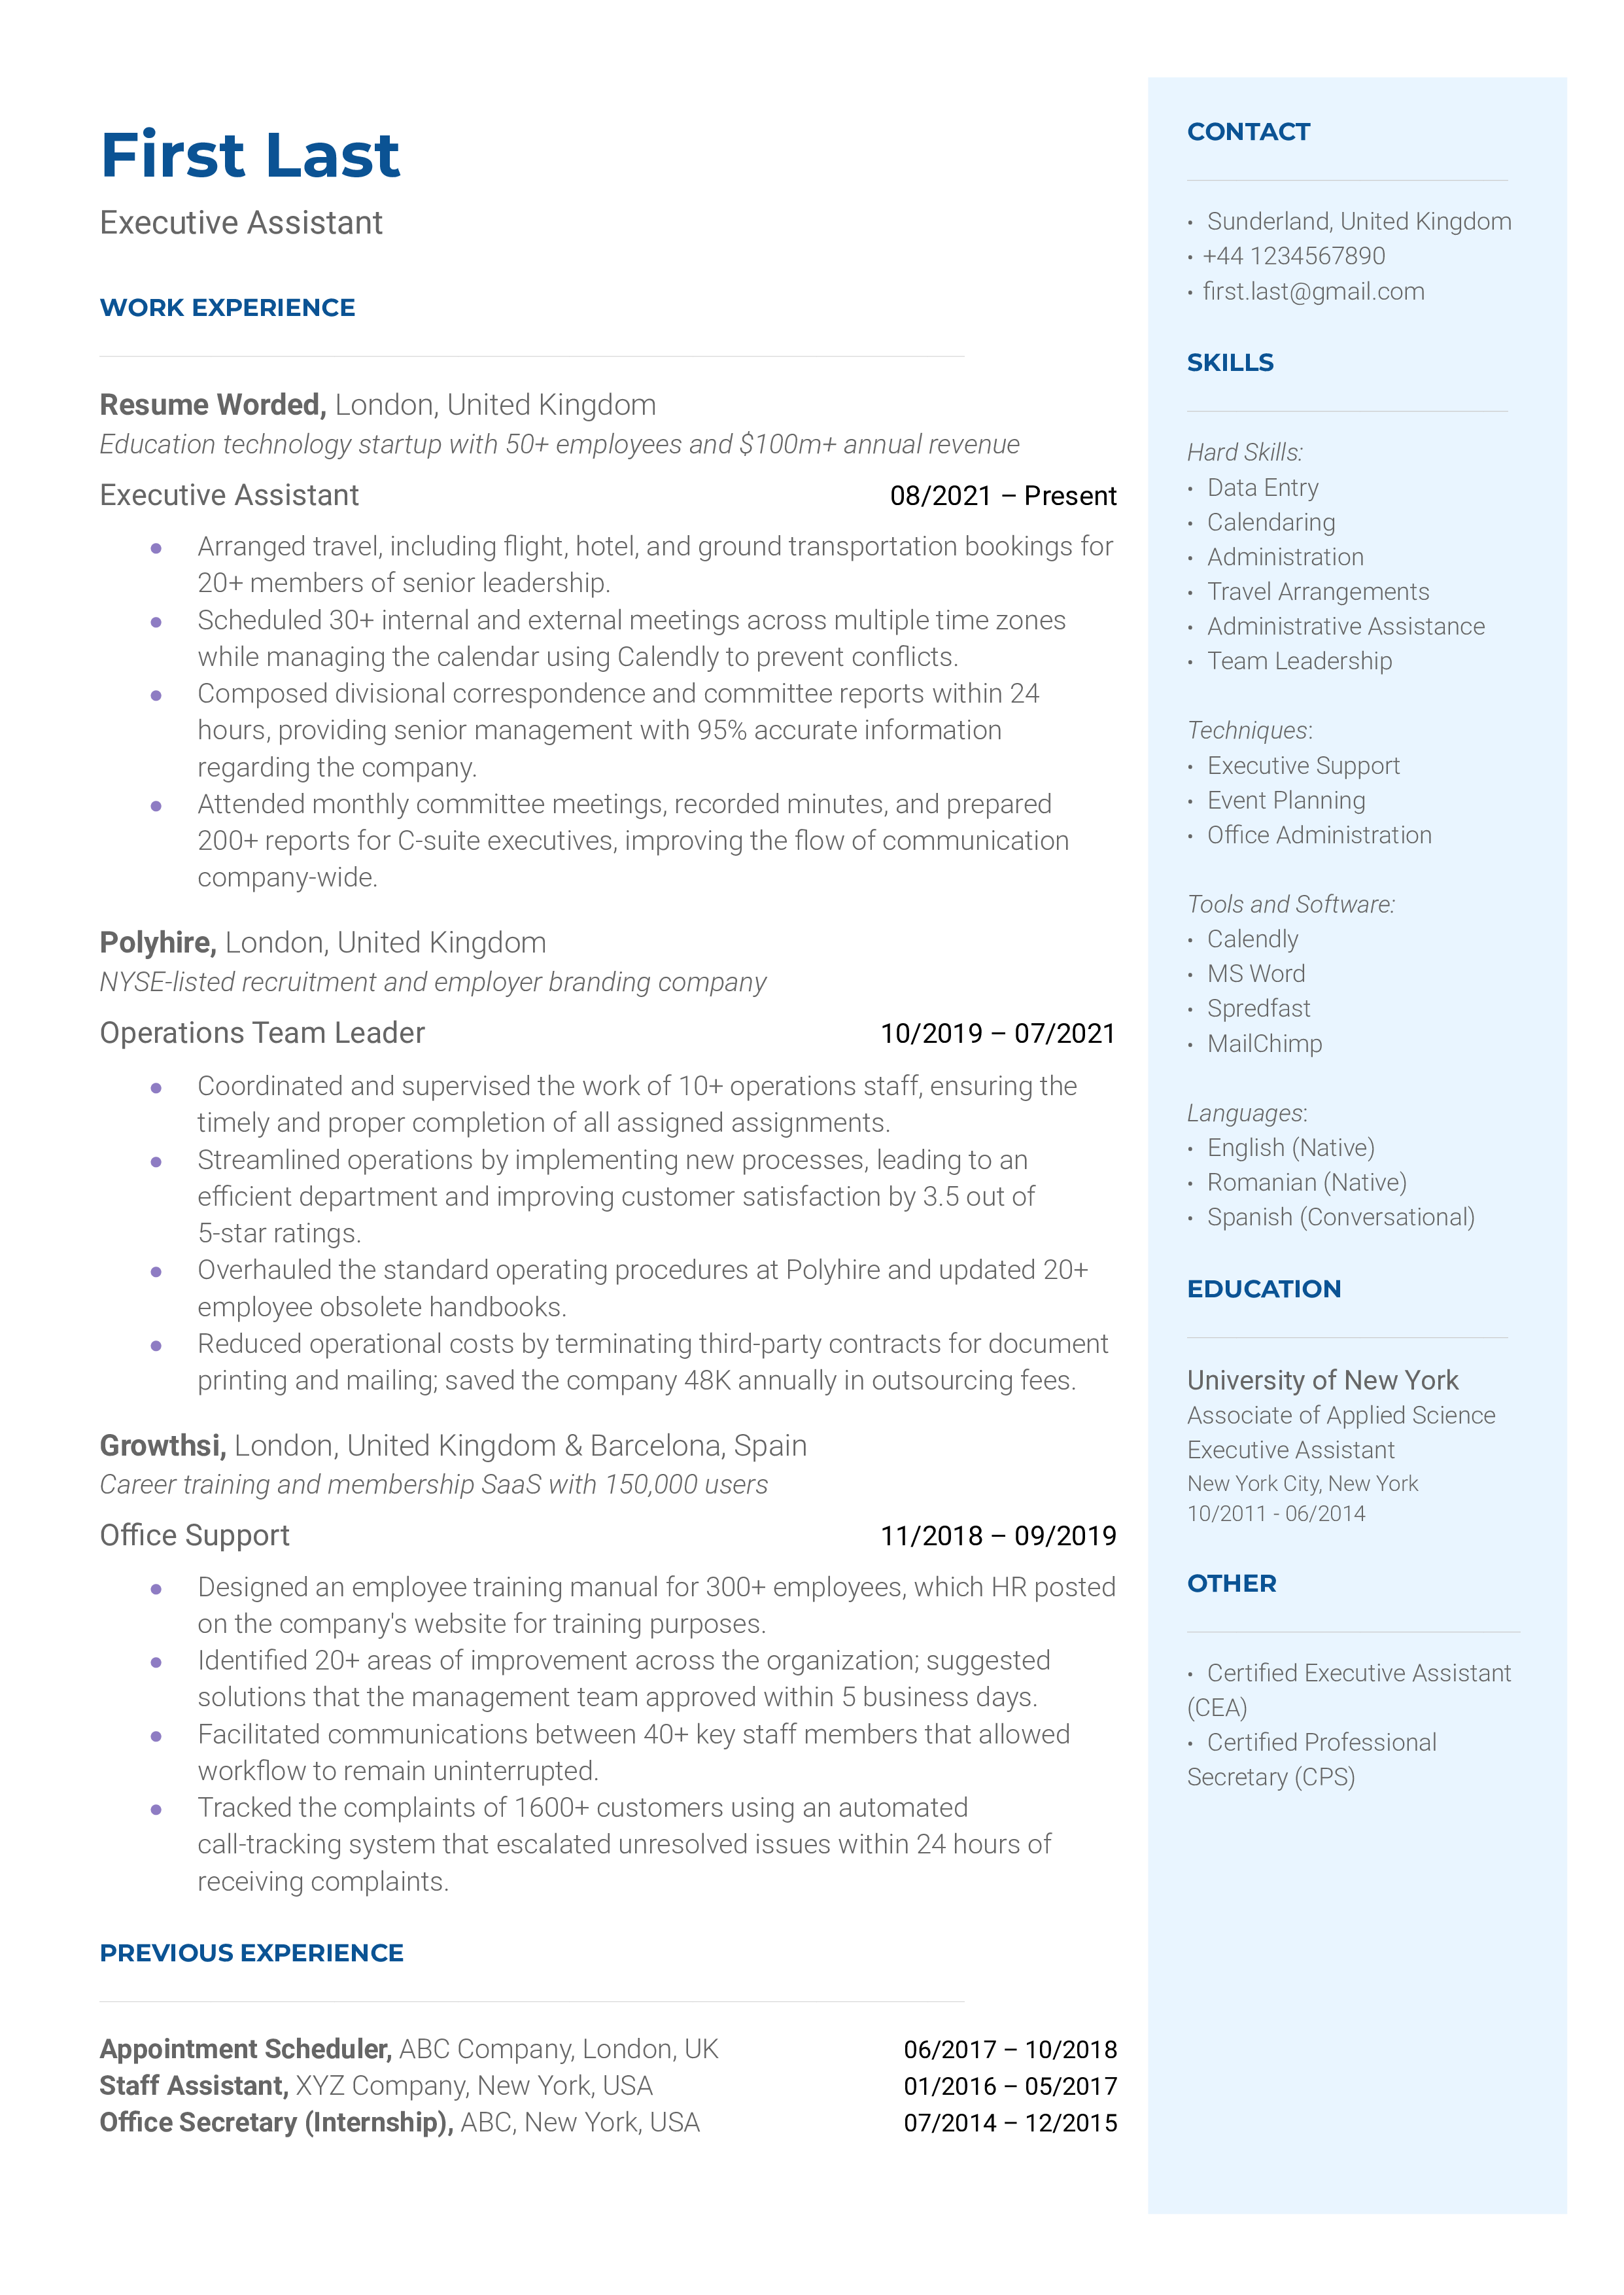 An executive assistant resume template including techniques, skills, and software they have on their toolkit.